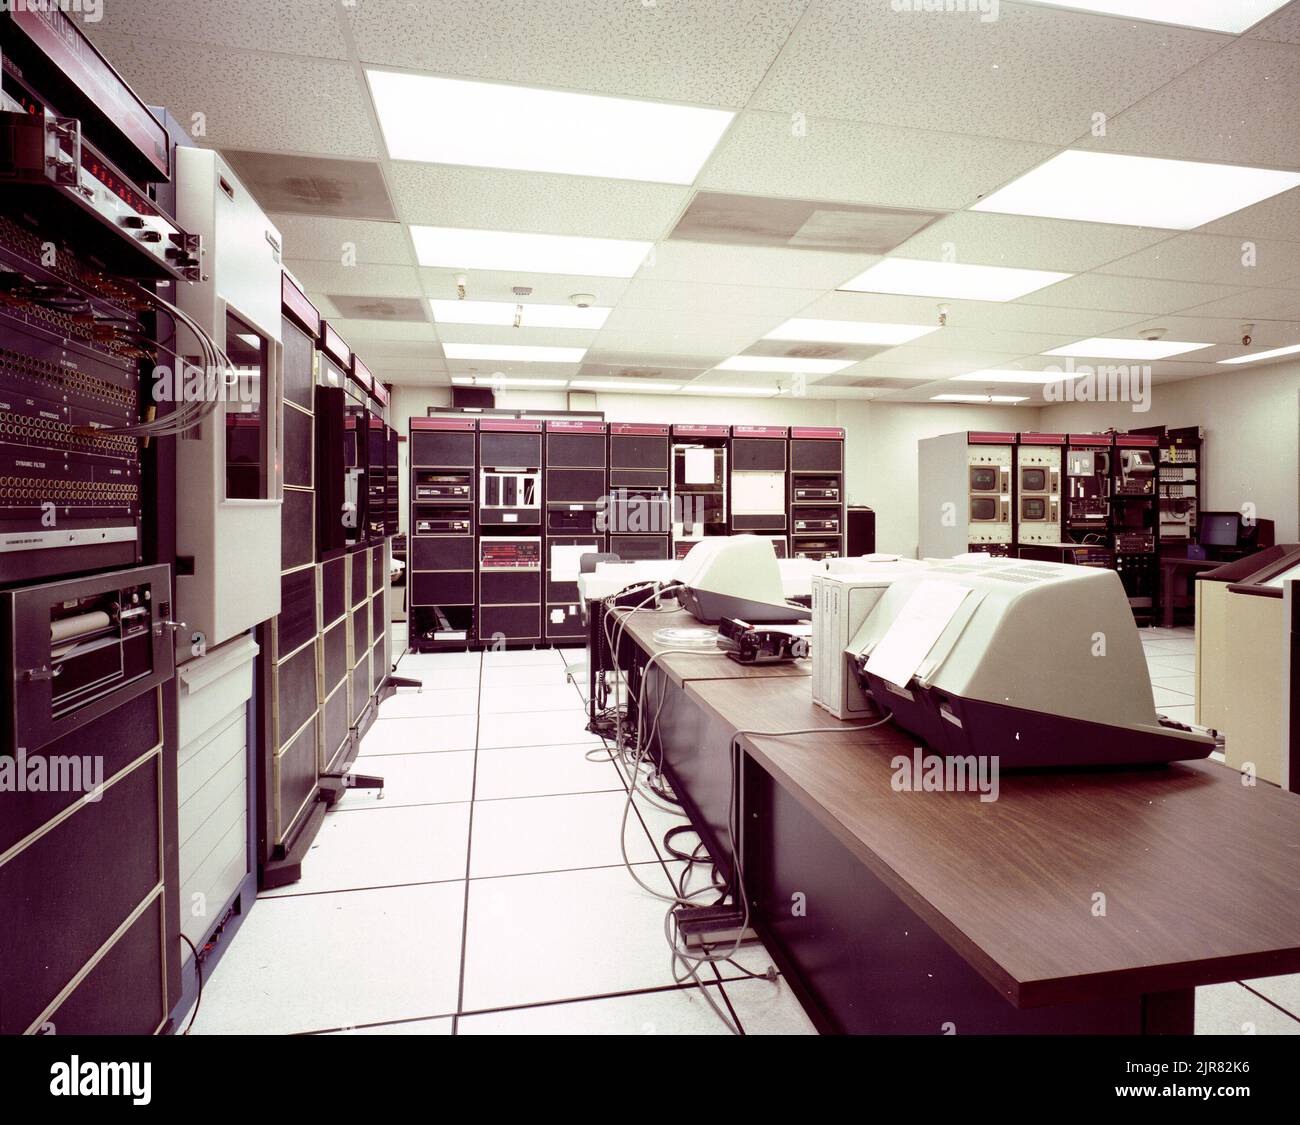 A810227 COMPUTER ROOM DOCUMENTATION CARTER BROYLES (Project Engineer) APR 15 81EG&G/NTS PHOTO LAB Publication Date: 4/15/1981  BROYLES, CARTER; COMPUTATIONAL EQUIPMENT; COMPUTER ROOM DOCUMENTATION; COMPUTER ROOMS; COMPUTERS; DOCUMENTATION; EDGERTON, GERMESHAUSEN & GRIER; EG&G; EQUIPMENT & INSTRUMENTS; EQUIPMENT (SNL); INSTRUMENTS & EQUIPMENT; NEVADA; NEVADA TEST SITE; NTS; NUCLEAR ENERGY TECHNOLOGY; NUCLEAR TESTING; ROOMS & BUILDING AREAS; TABLES; TEST SITES; UGT; UNDERGROUND TESTING; WIRE & CABLES  historical images. 1972 - 2012. Department of Energy. National Nuclear Security Administration. Stock Photo